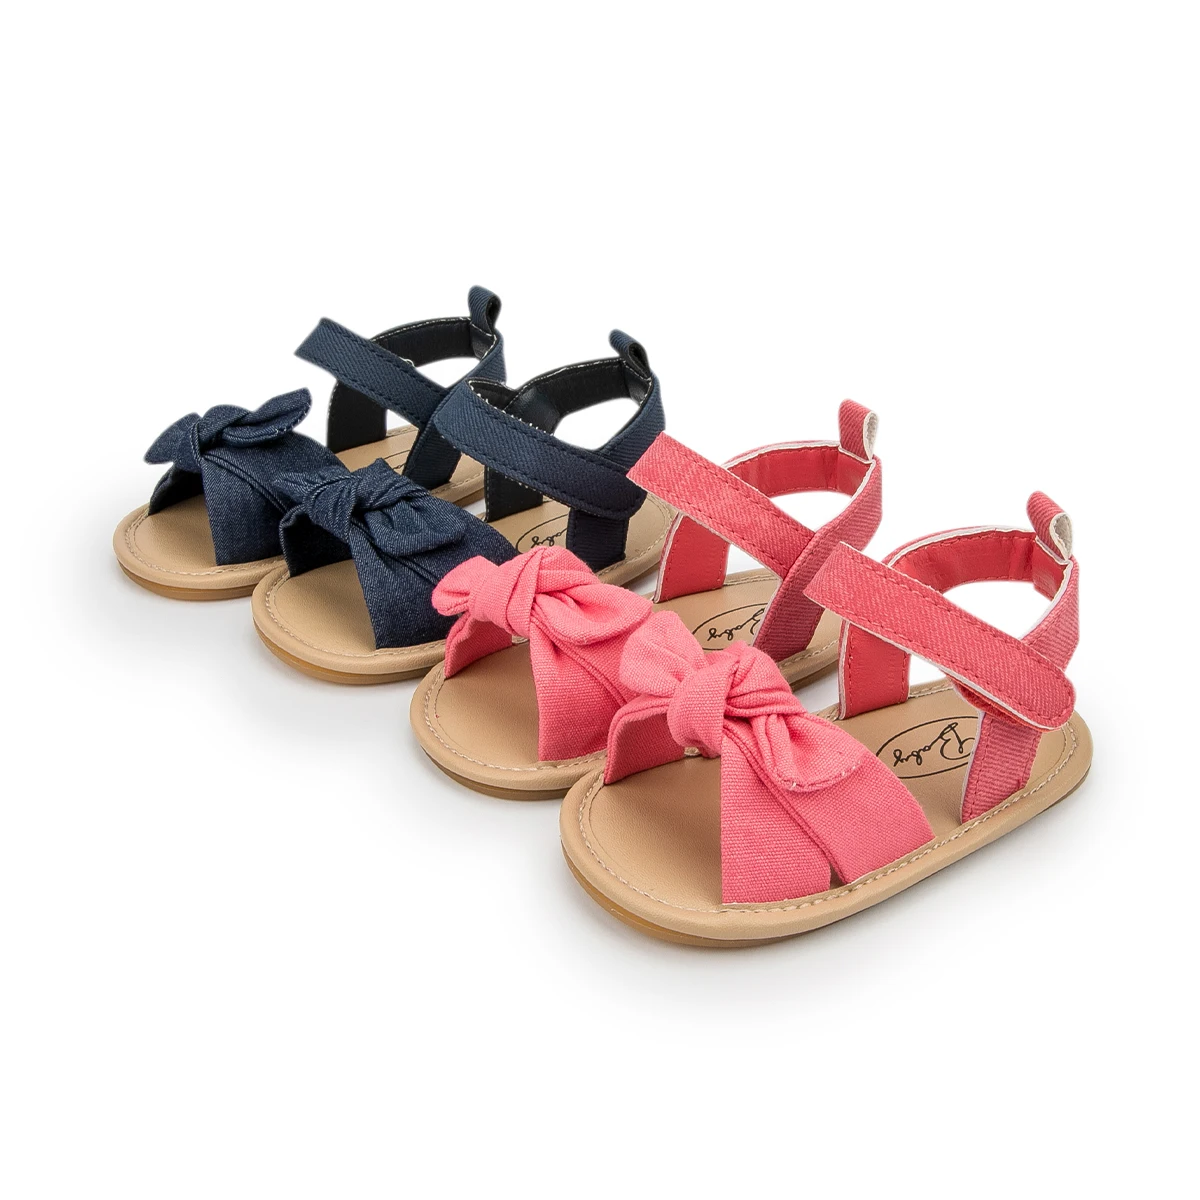 New Arrival Rubber Soft Sole Baby Walking Shoes Toddler Girl Anti-slip Prewalk Baby Sandals&Slippers For Girls